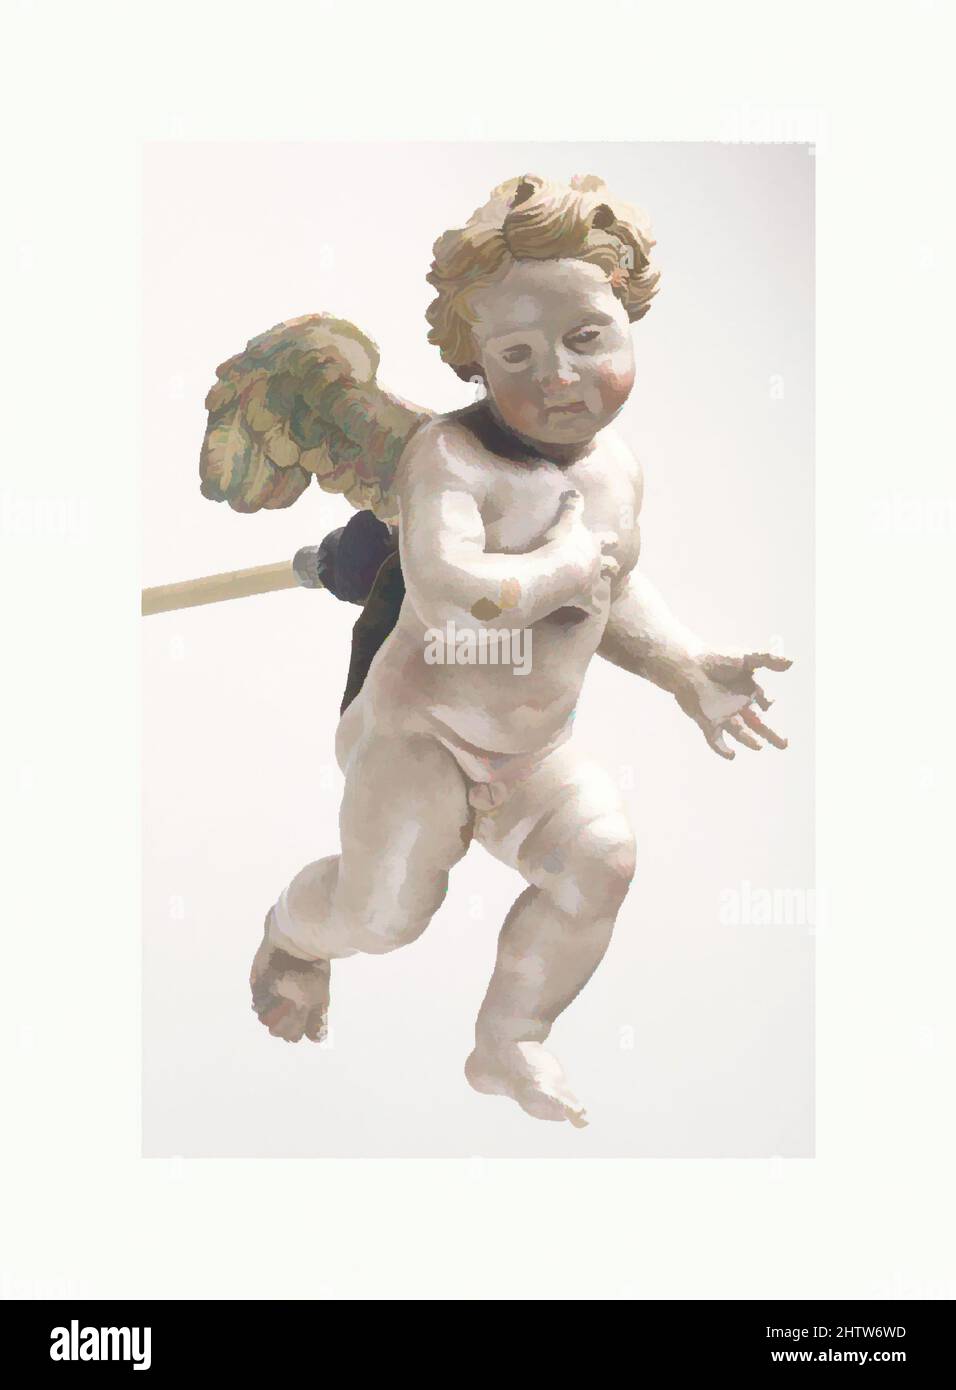 Art inspired by Cherub, second half 18th century, Italian, Naples, Polychromed terracotta, H. 8 in. (20.3 cm.), Crèche, Classic works modernized by Artotop with a splash of modernity. Shapes, color and value, eye-catching visual impact on art. Emotions through freedom of artworks in a contemporary way. A timeless message pursuing a wildly creative new direction. Artists turning to the digital medium and creating the Artotop NFT Stock Photo